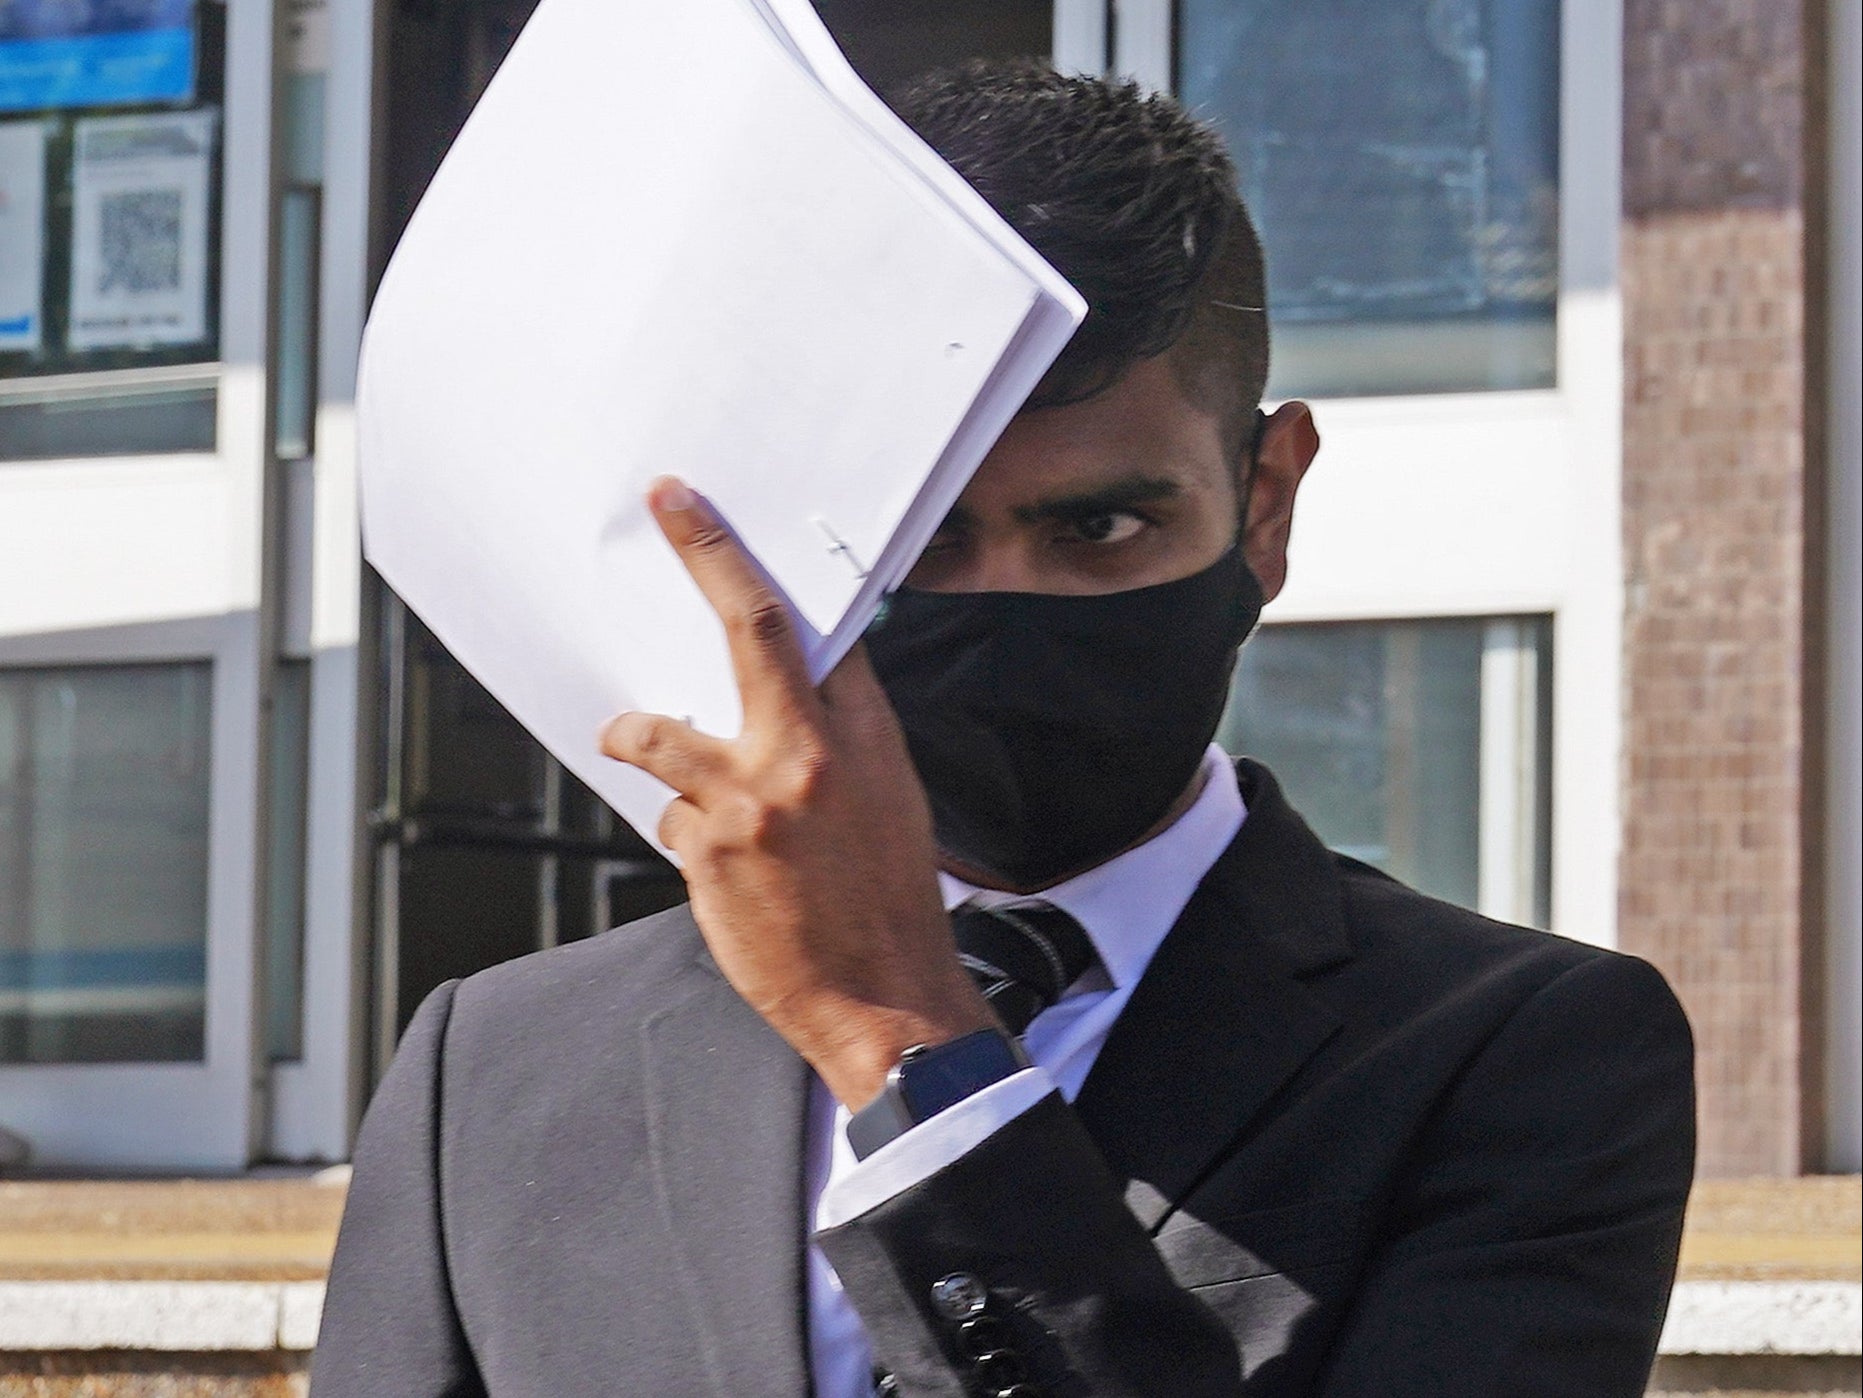 Javed Saumtally covers up as he leaves Hove Crown Court in August